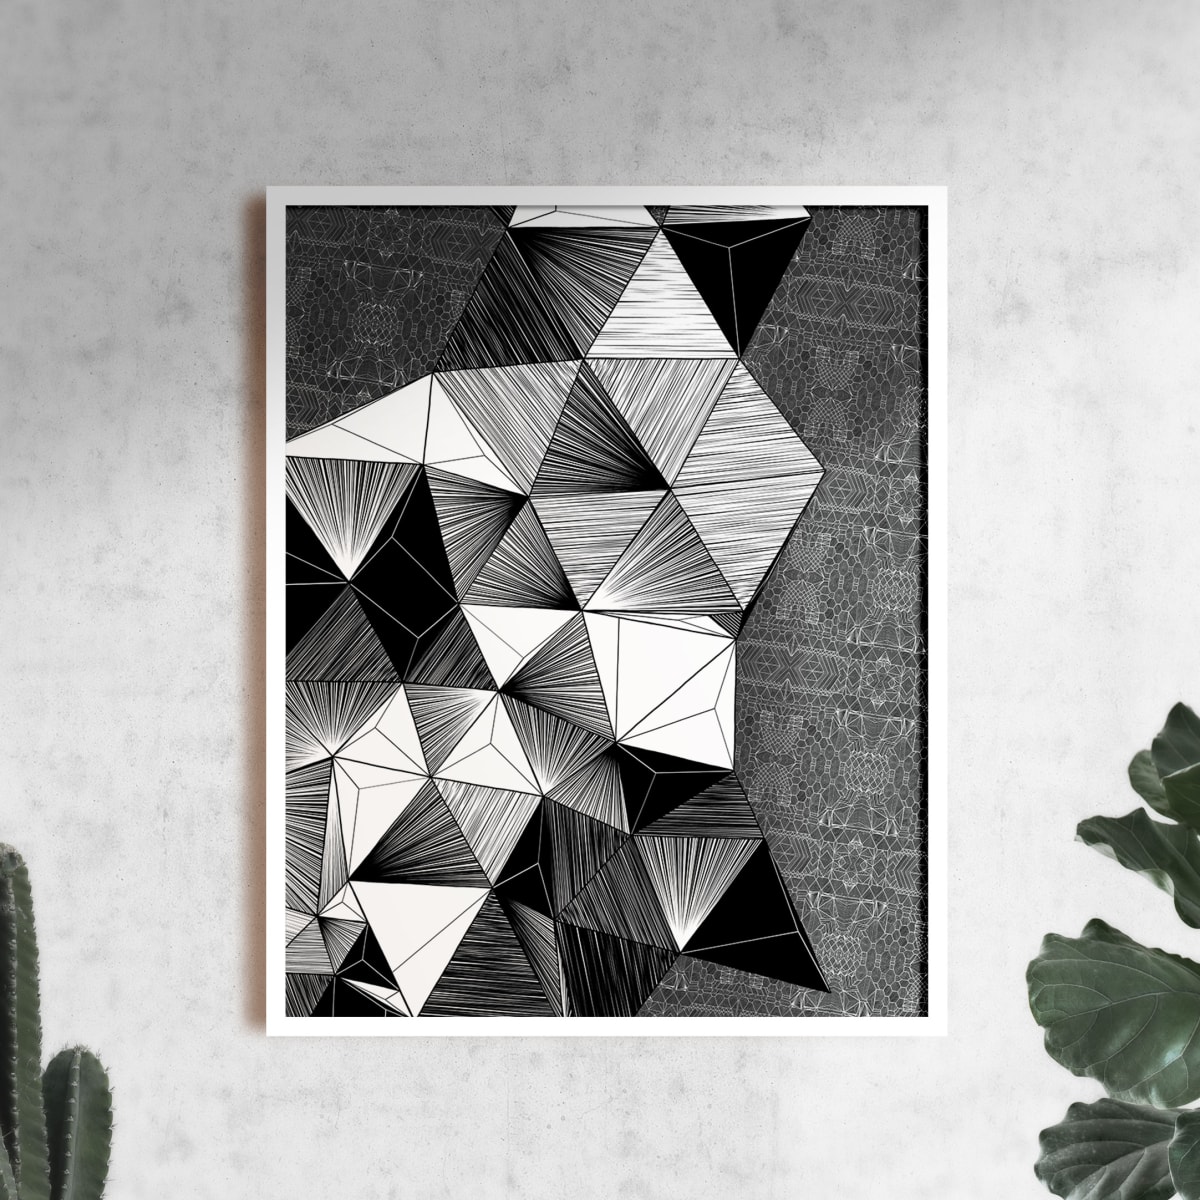 "Conscious Growth 061" Large One-of-a-Kind Print by Debbie Clapper  Image: Conscious Growth Print 061, a black and white one of a kind archival modern art print